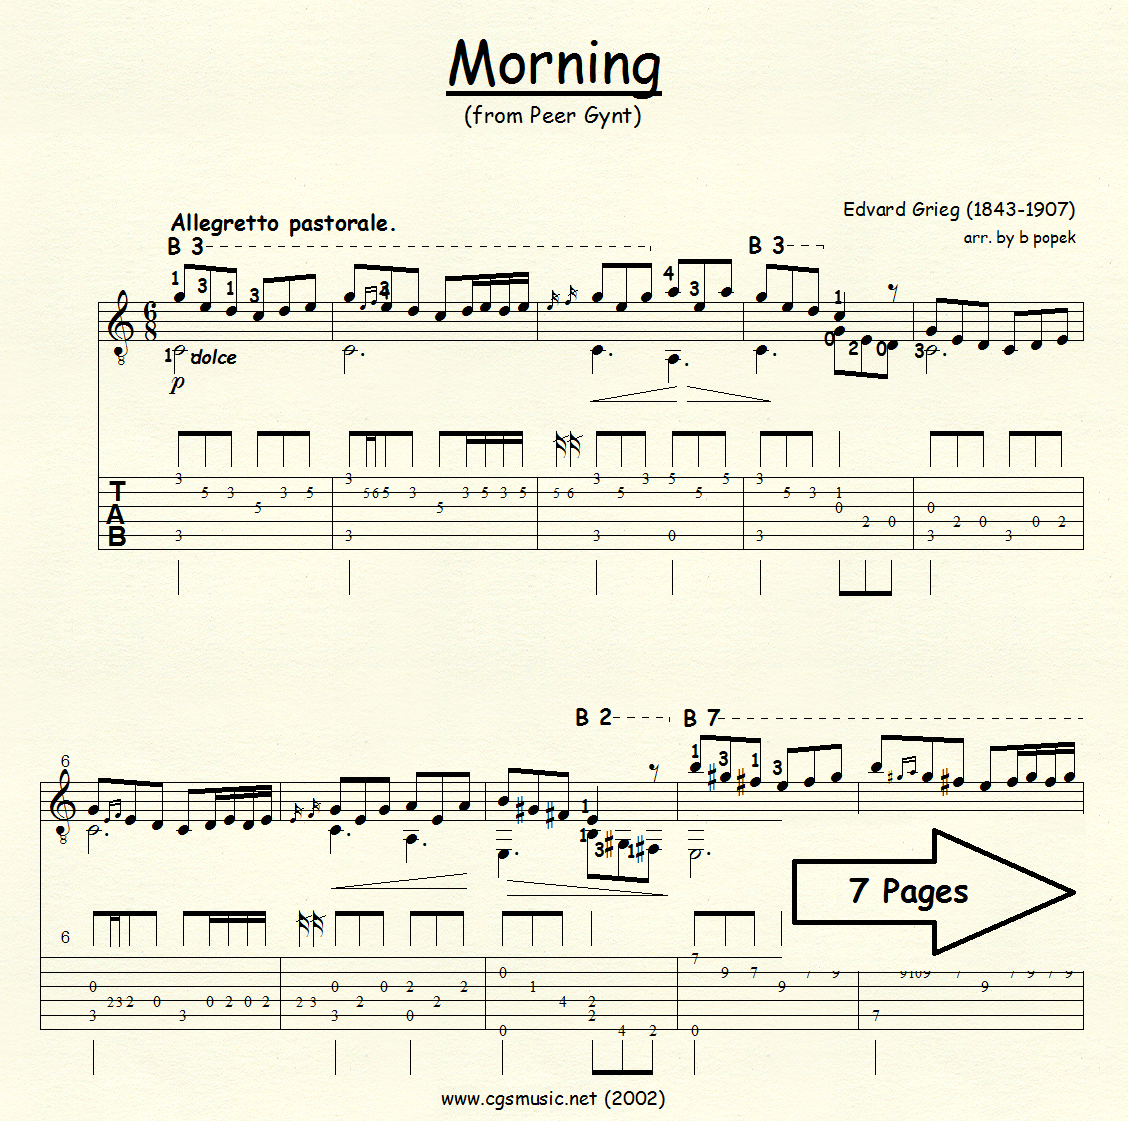 Morning (Grieg) for Classical Guitar in Tablature